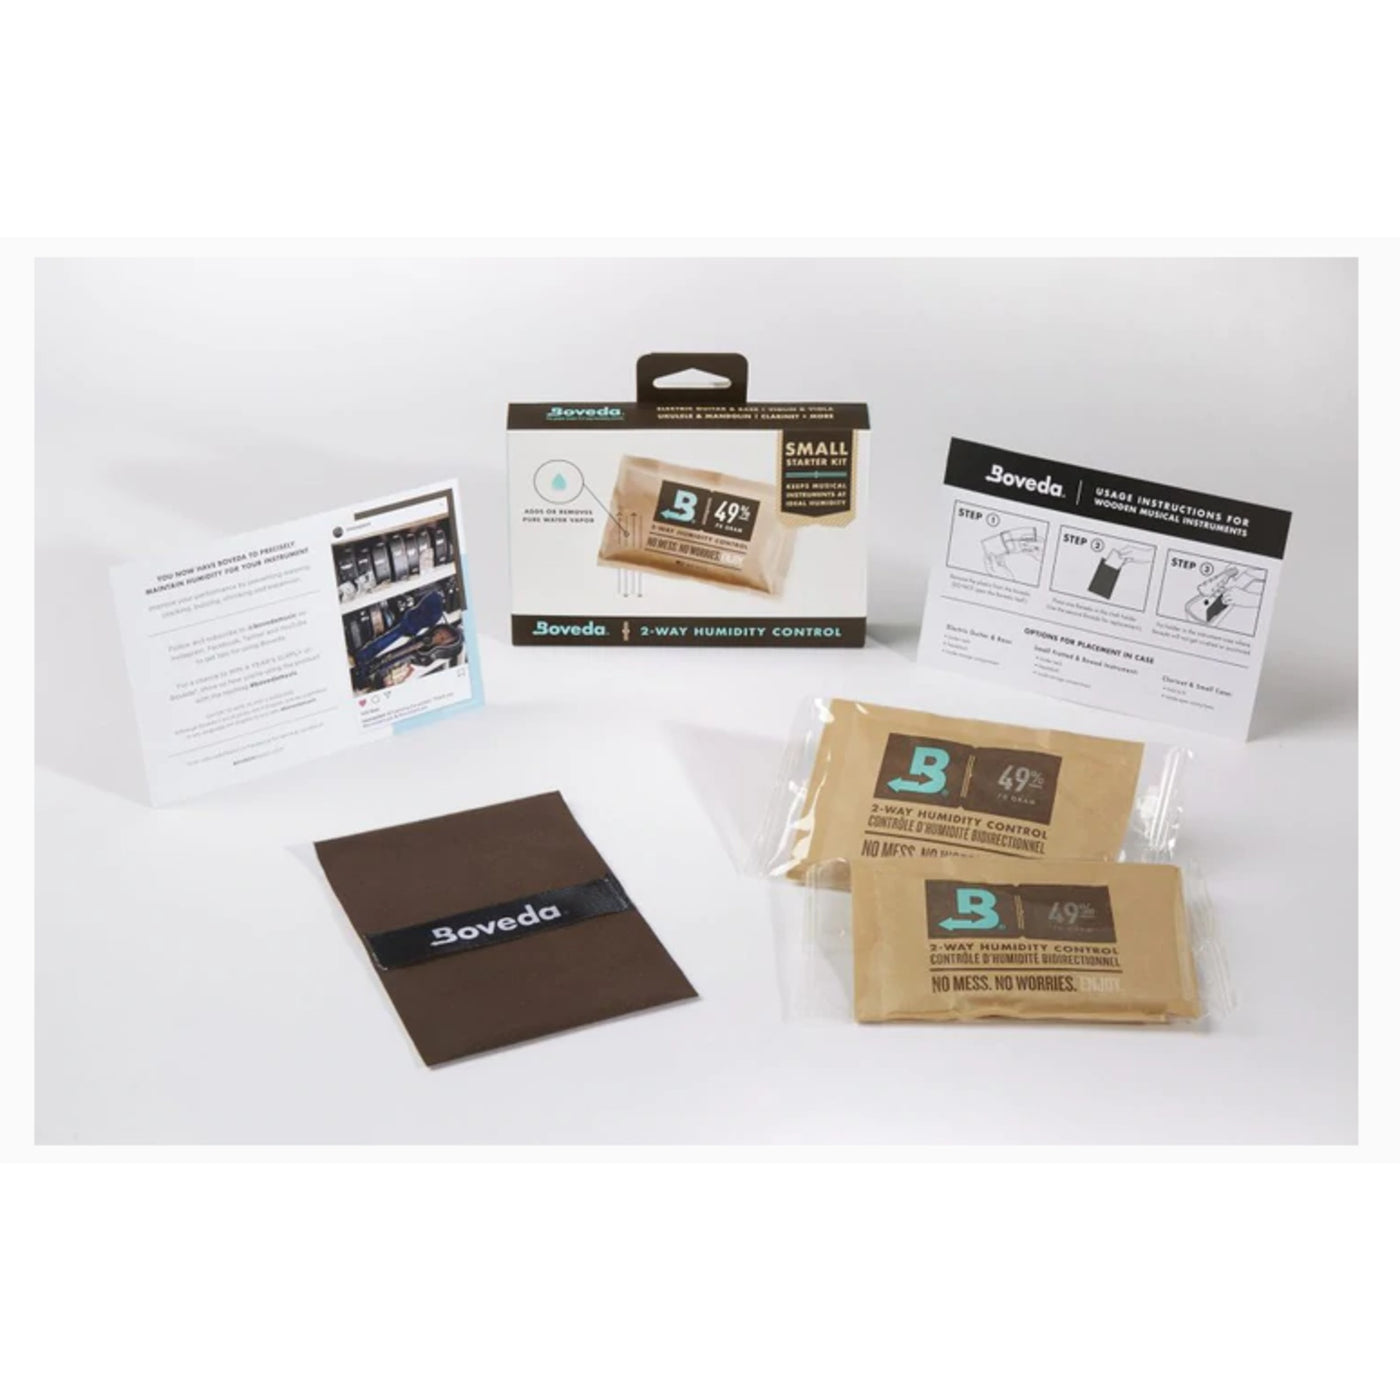 Boveda 2-Way Humidity Control Kit, Small with Saddlebag Holders, 49% RH, 70g (BVMFK-SM)